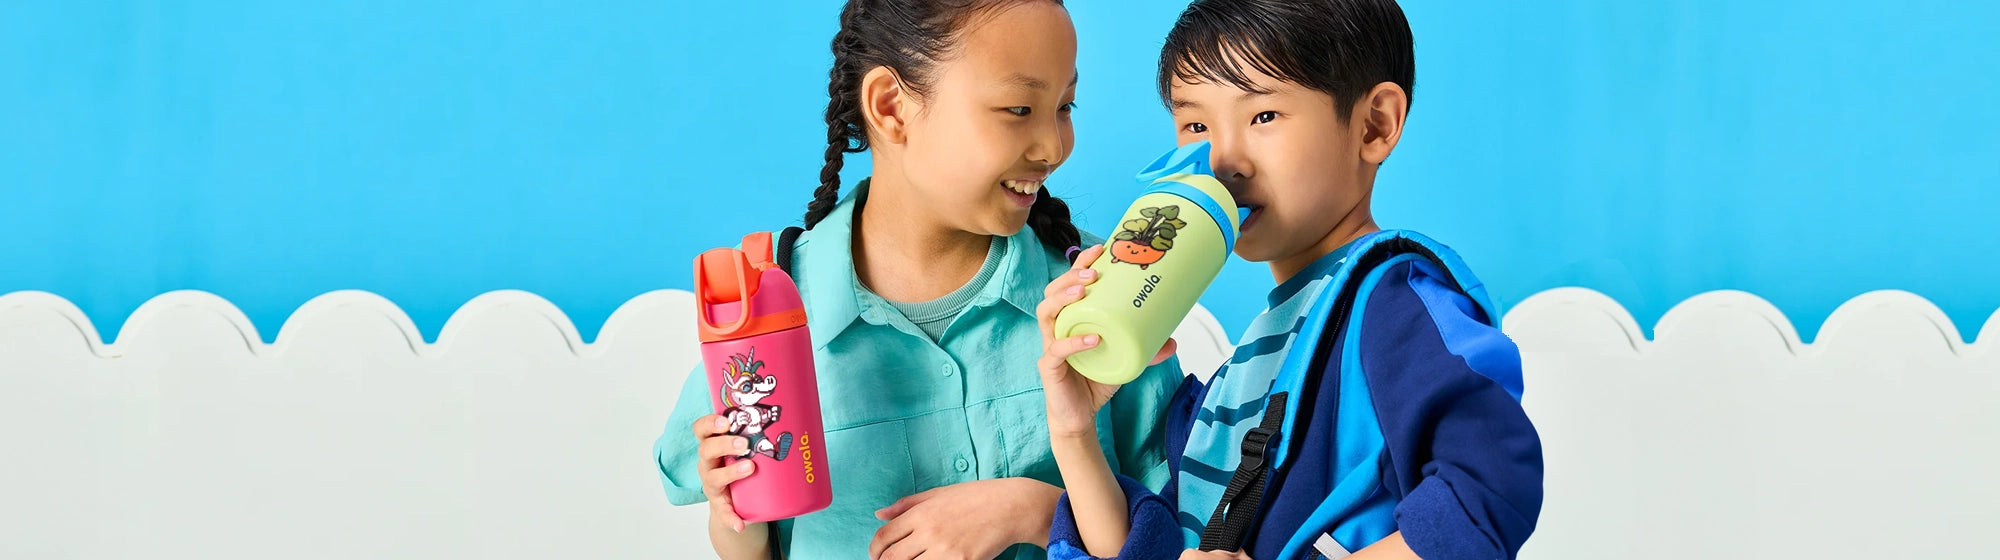 two kids drinking from owala freesip kids straw bottles. Straw bottles have a personalized color print.